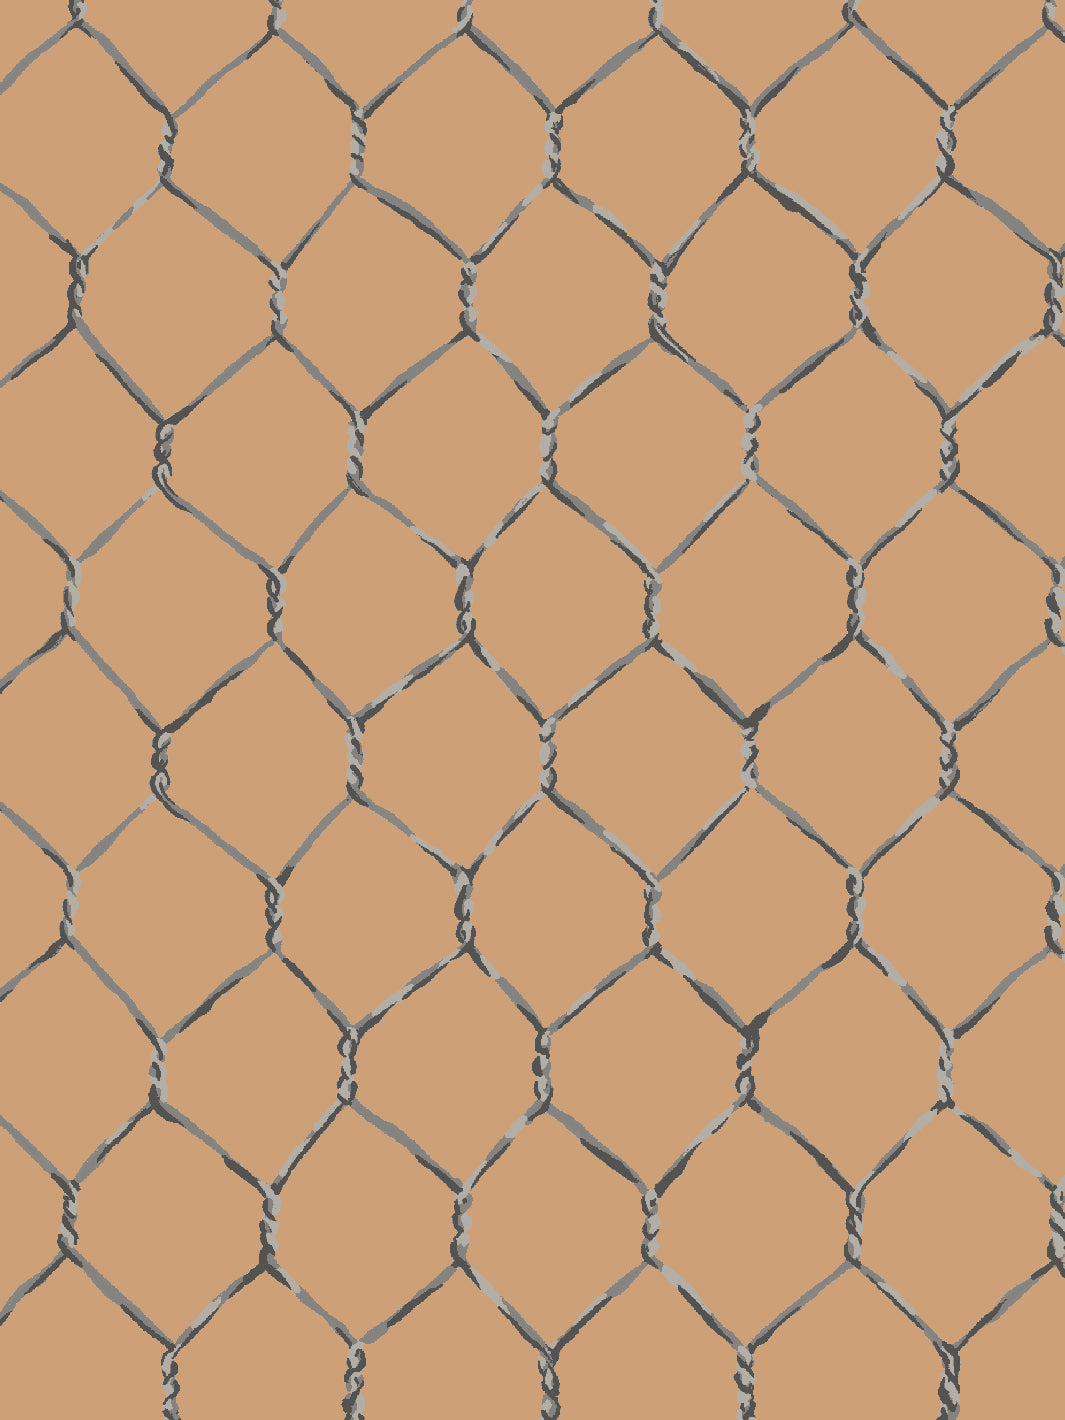 'Evelyn's Chicken Wire' Wallpaper by Sarah Jessica Parker - Metal on Pecan